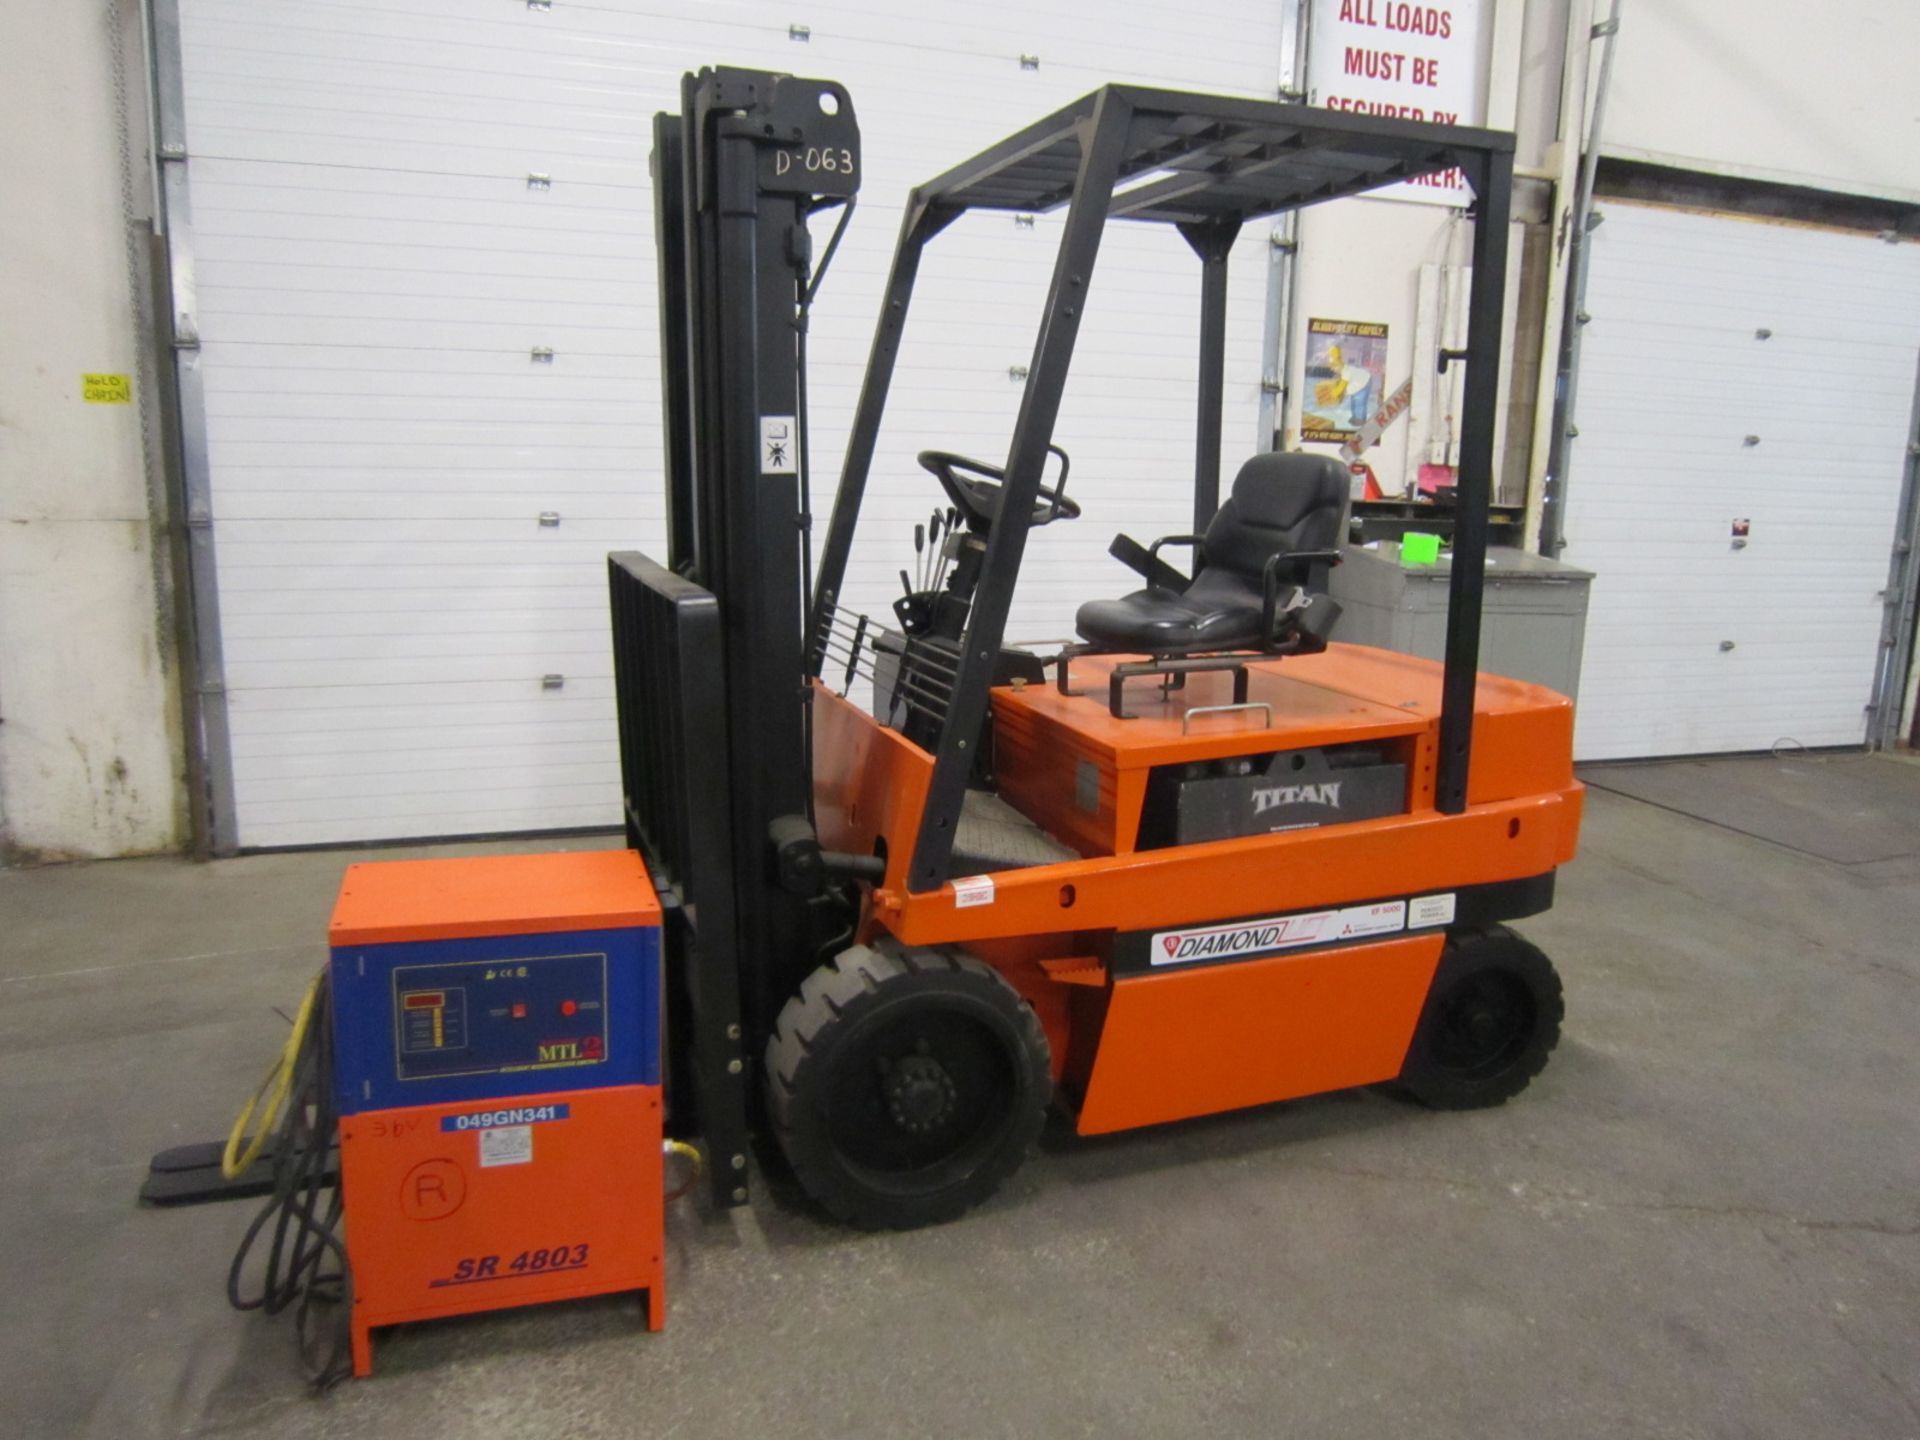 2008 Mitsubishi Diamond Electric Forklift 4000lbs Capacity with 3-stage mast - MINT UNIT only 4